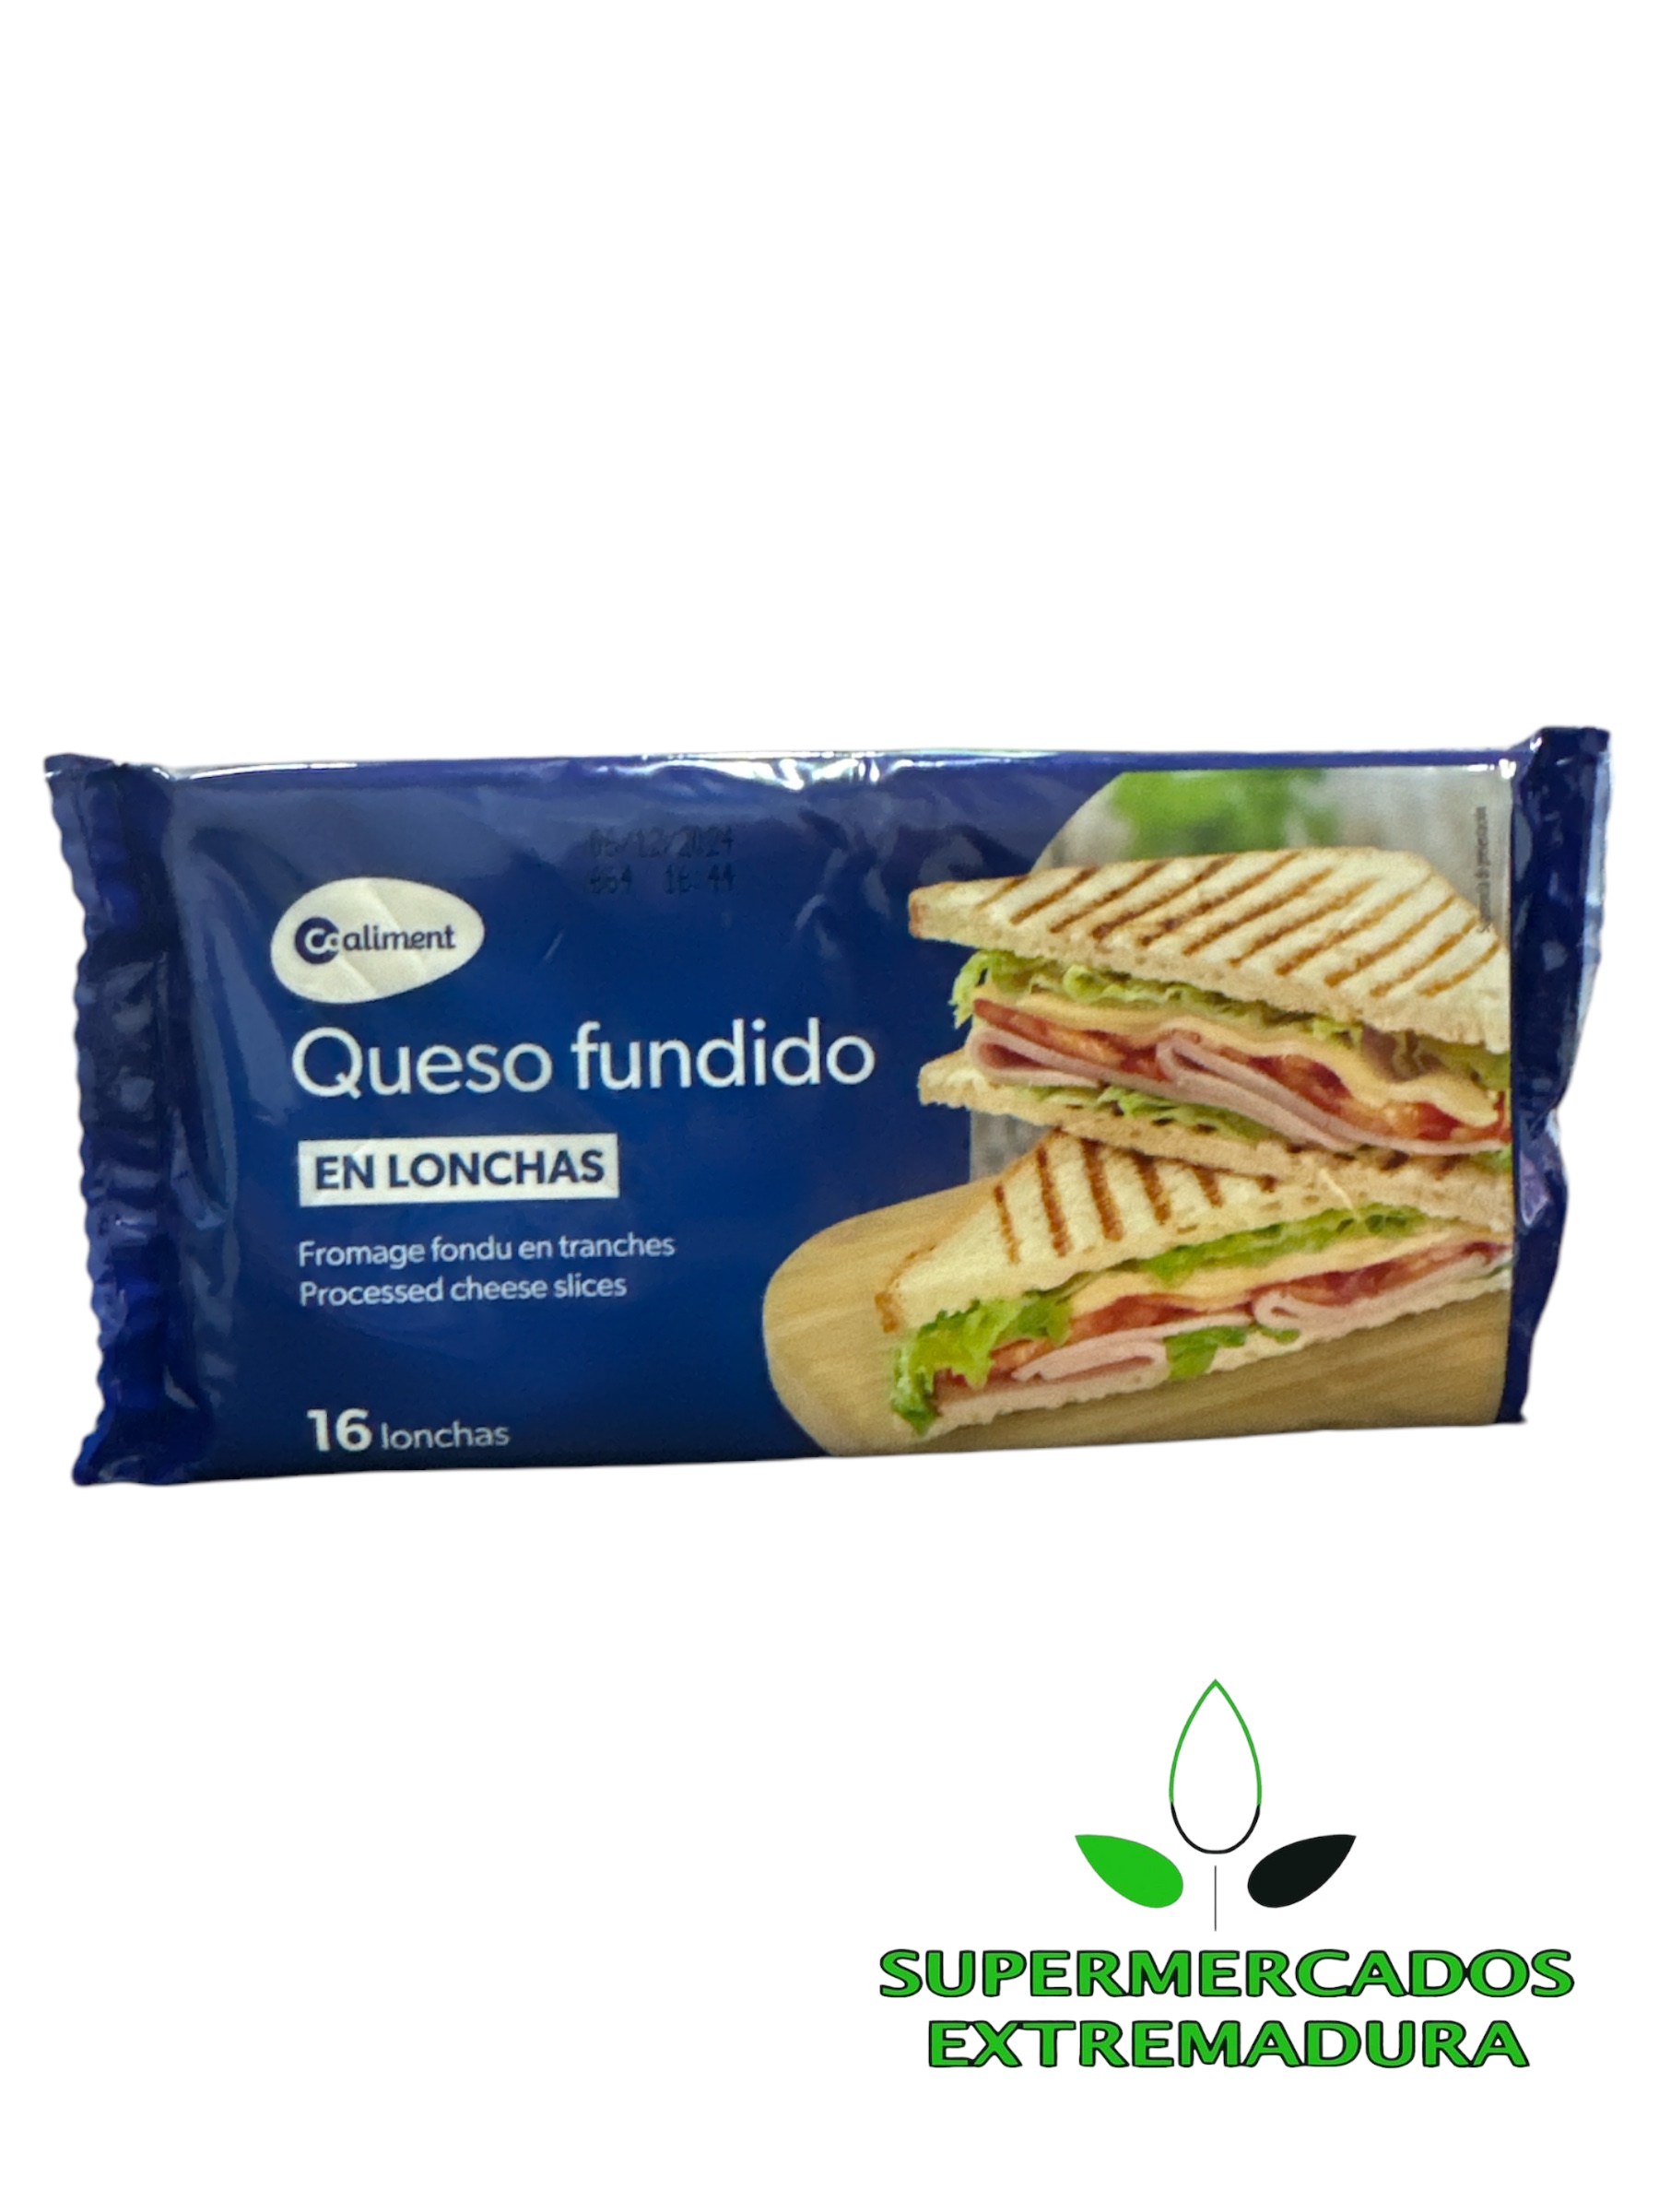 QUESO FUNDIDO LONCHAS 16ud. COALIMENT 300g.